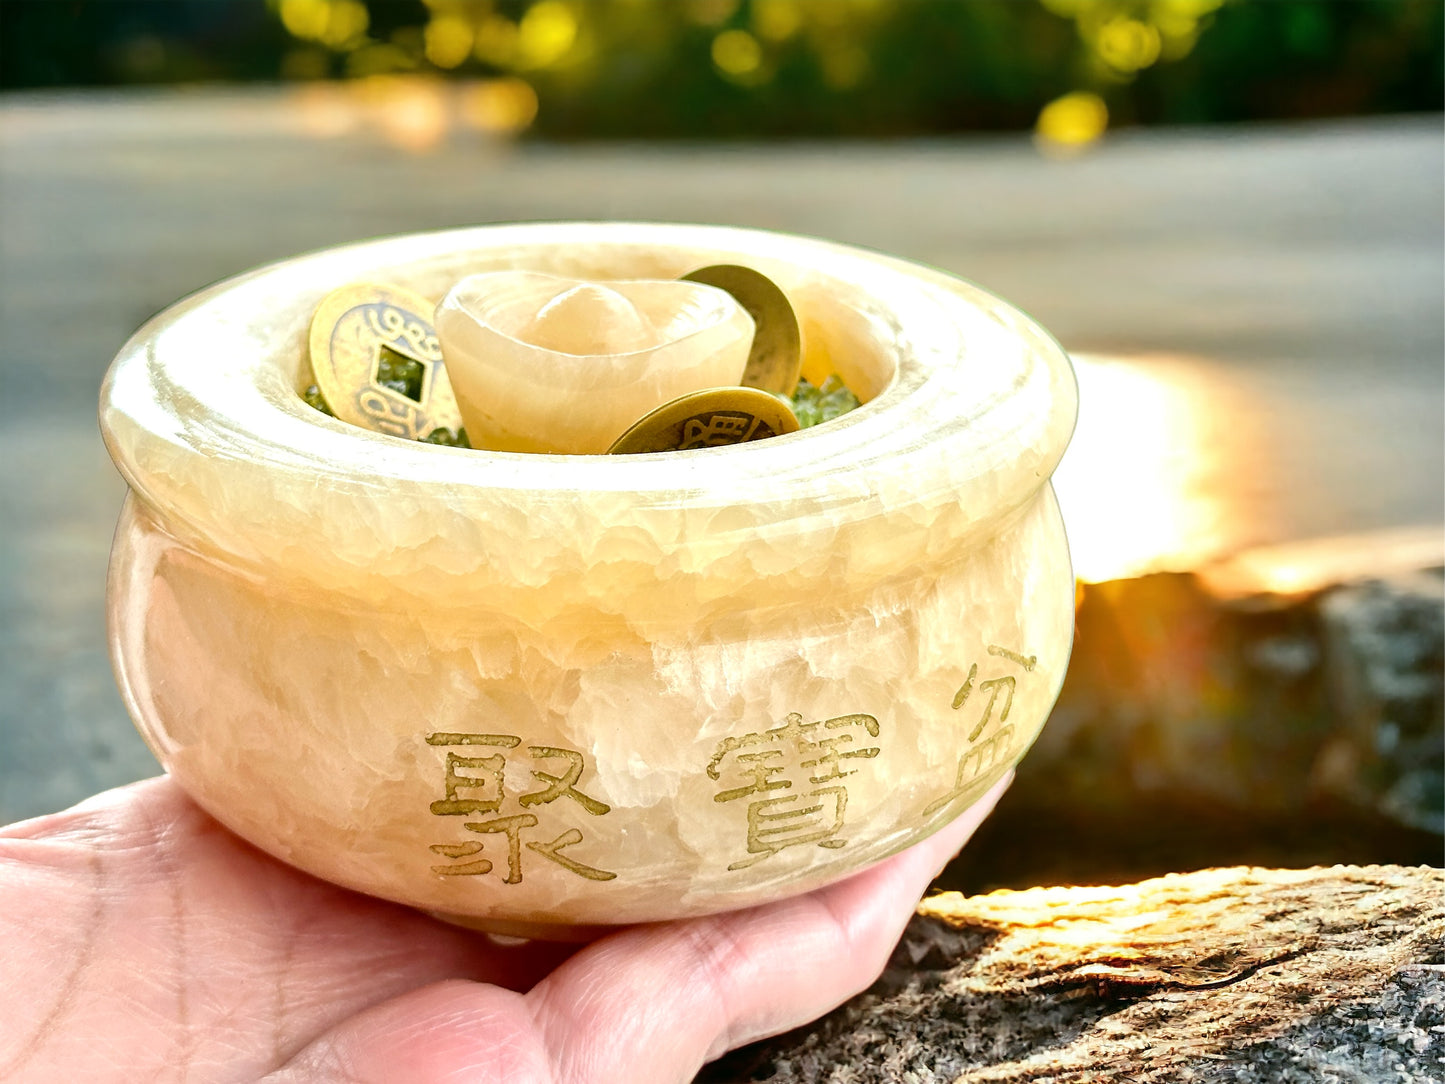 Attract Wealth Treasure Pot Golden Calcite with Free Peridot Chips, Ingot & Coins (Feng Shui)